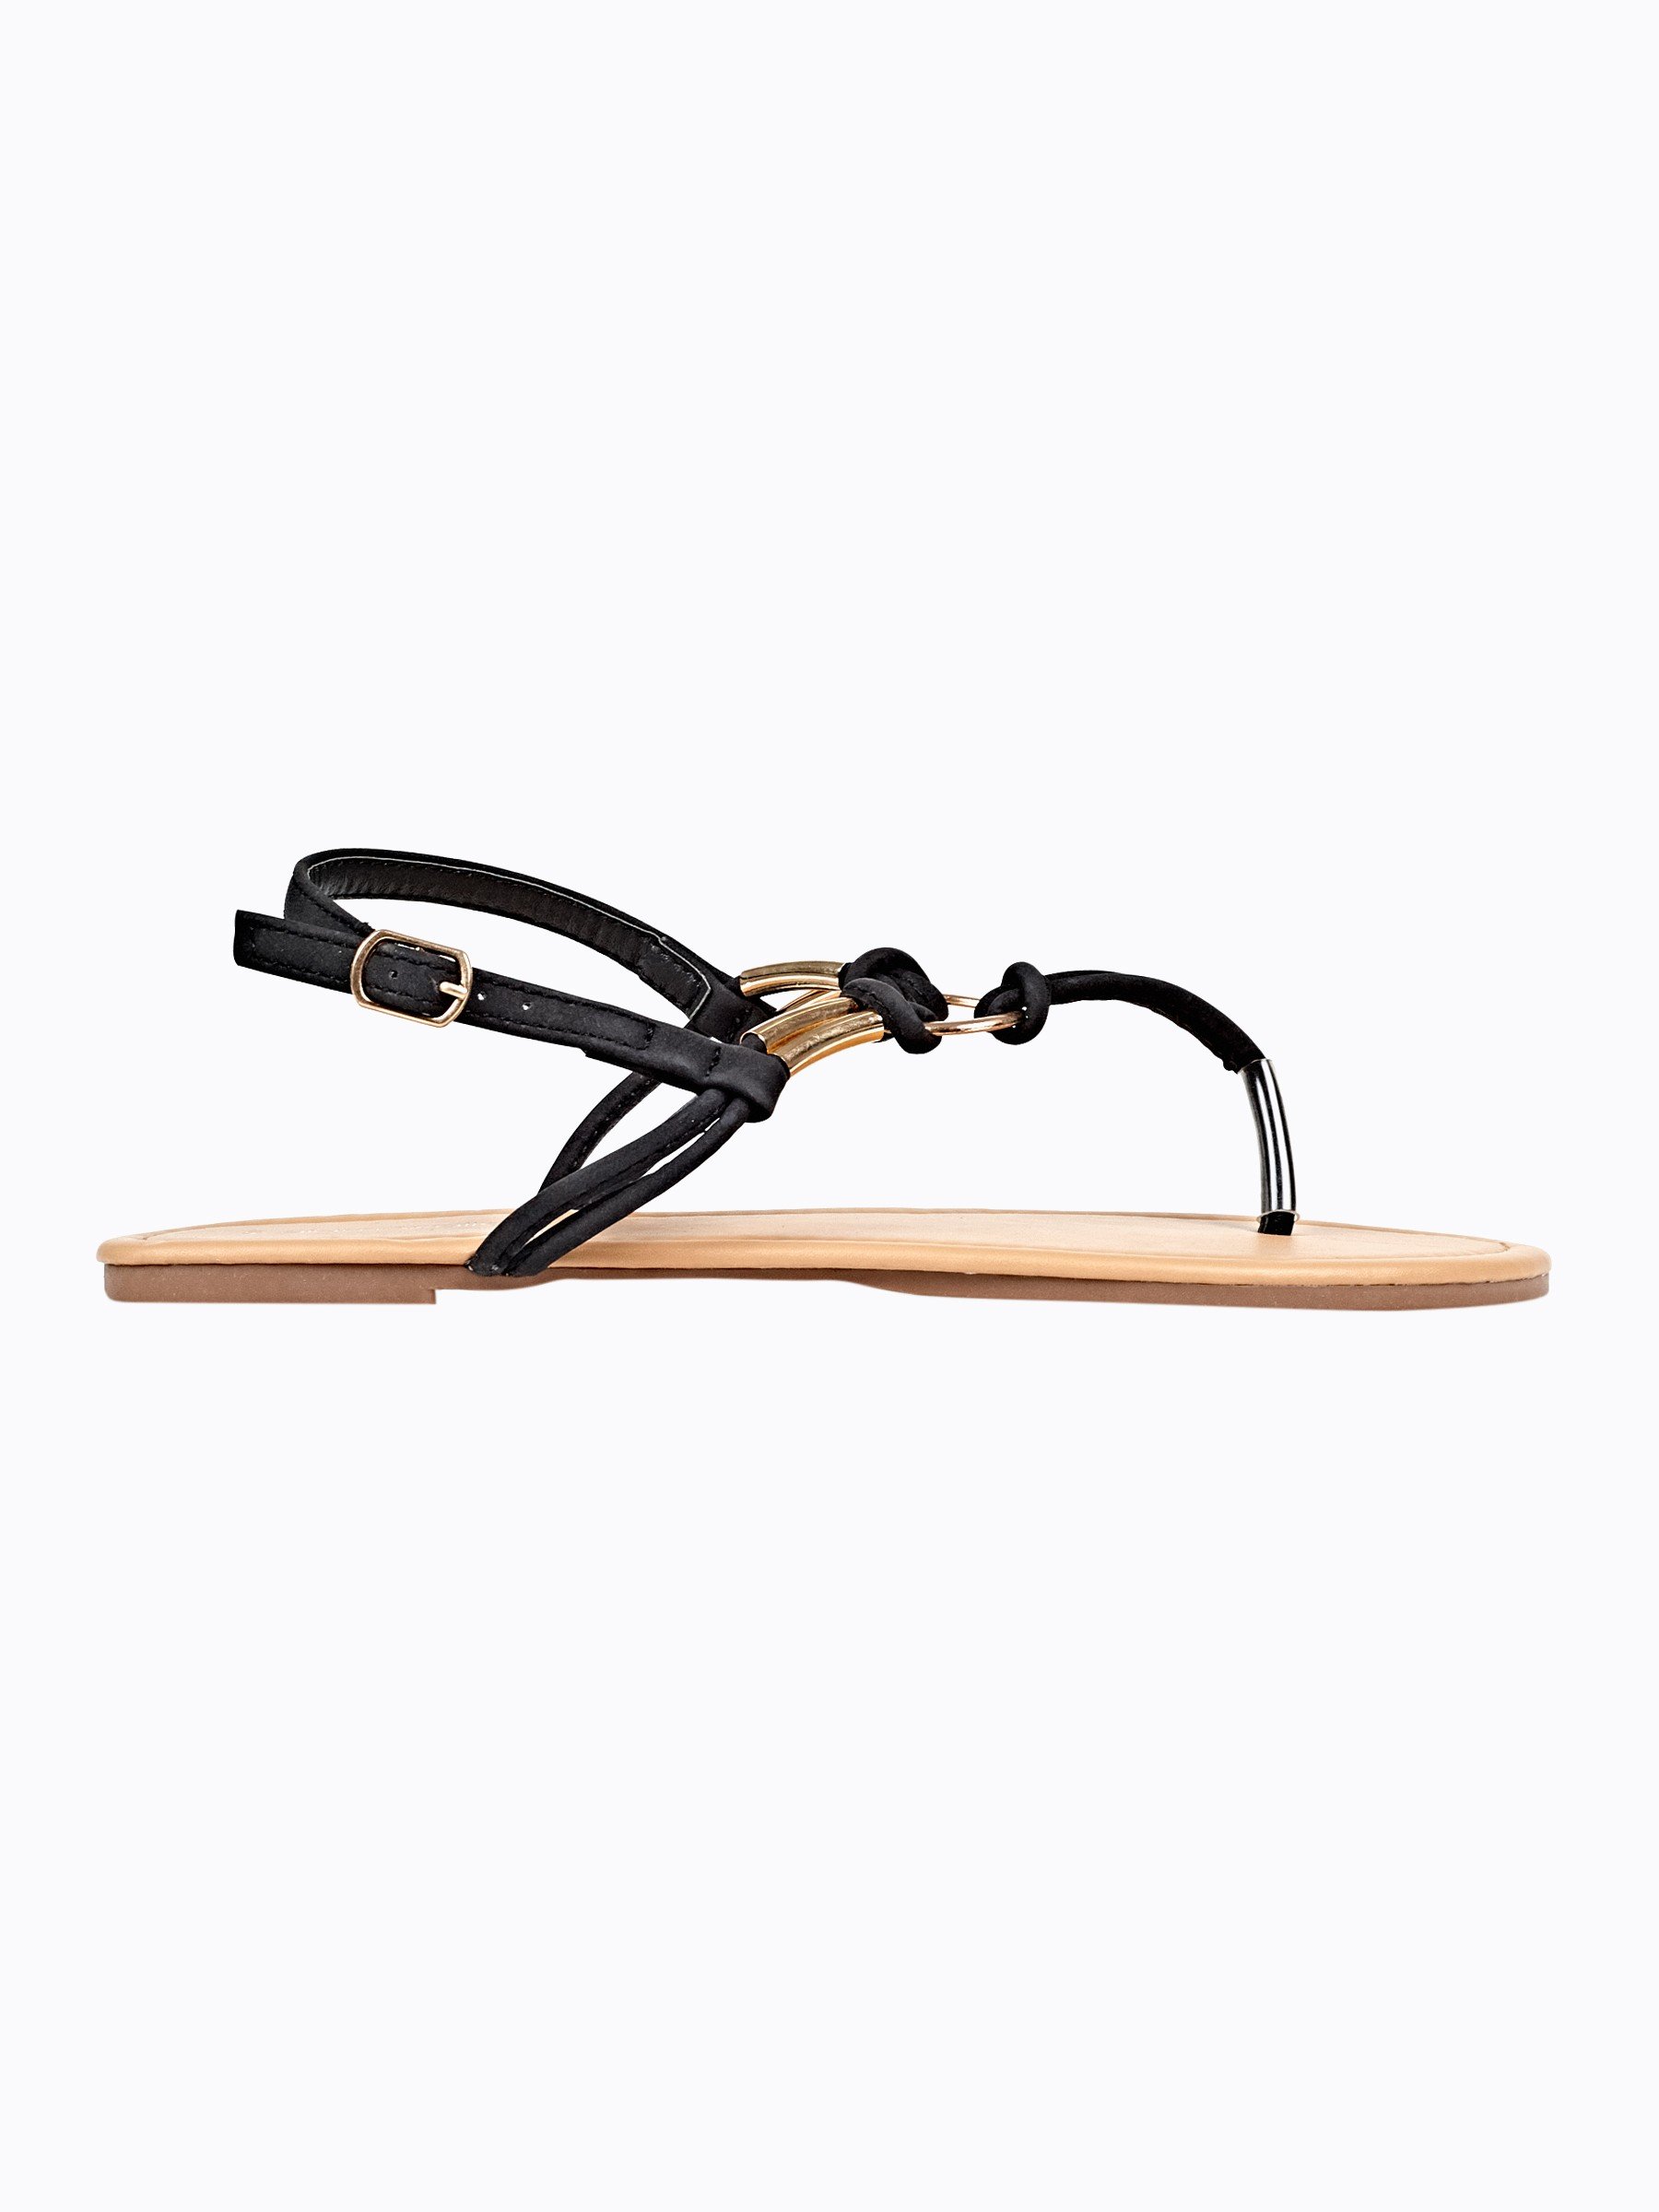 FLAT SANDALS WITH METAL DETAILS | GATE